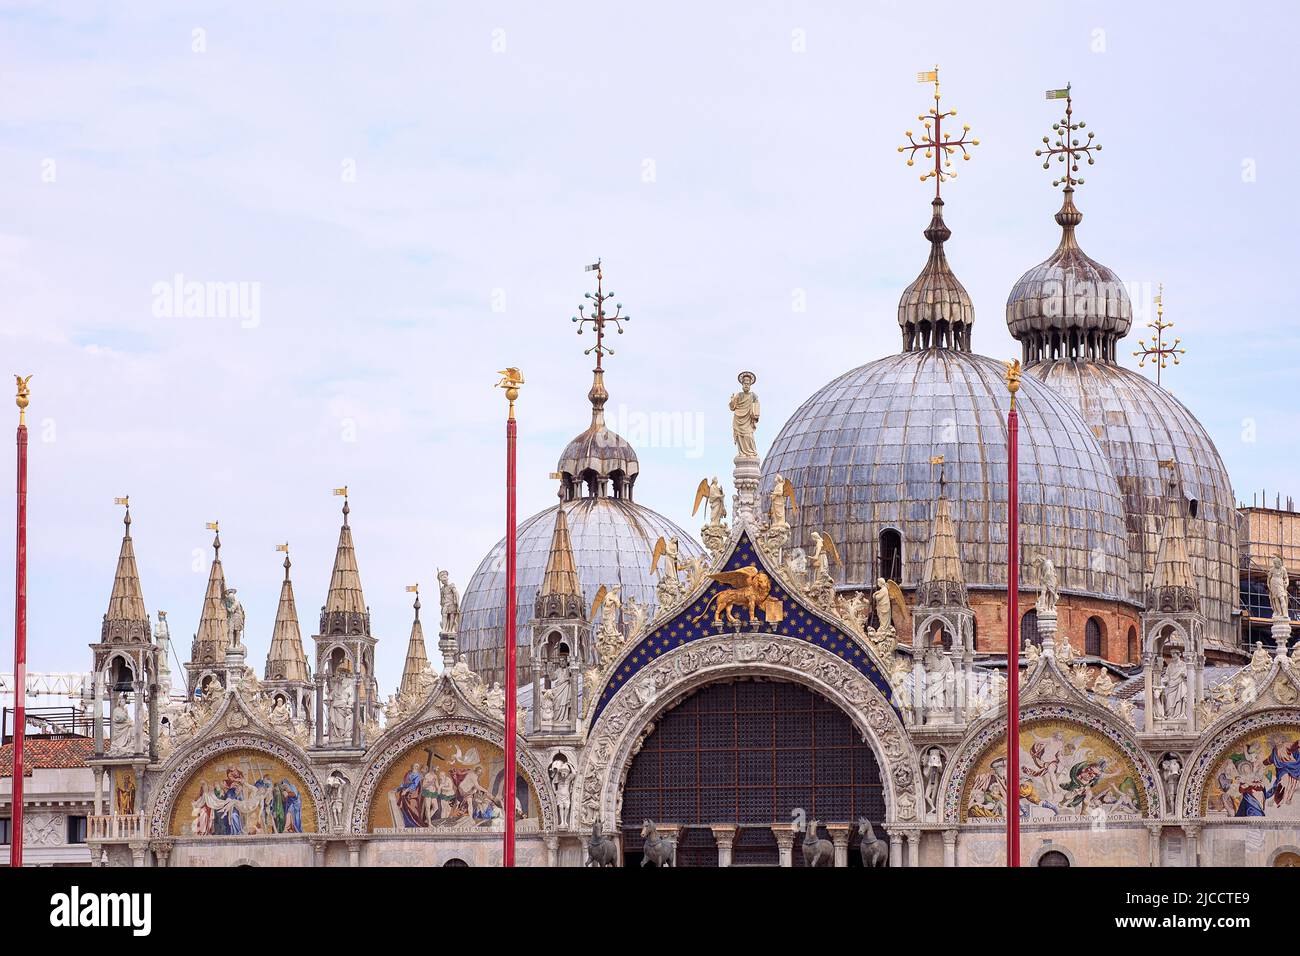 Close-up of St Mark Cathedral with dome and art work decorations. International landmark in Venice, Italy. Stock Photo